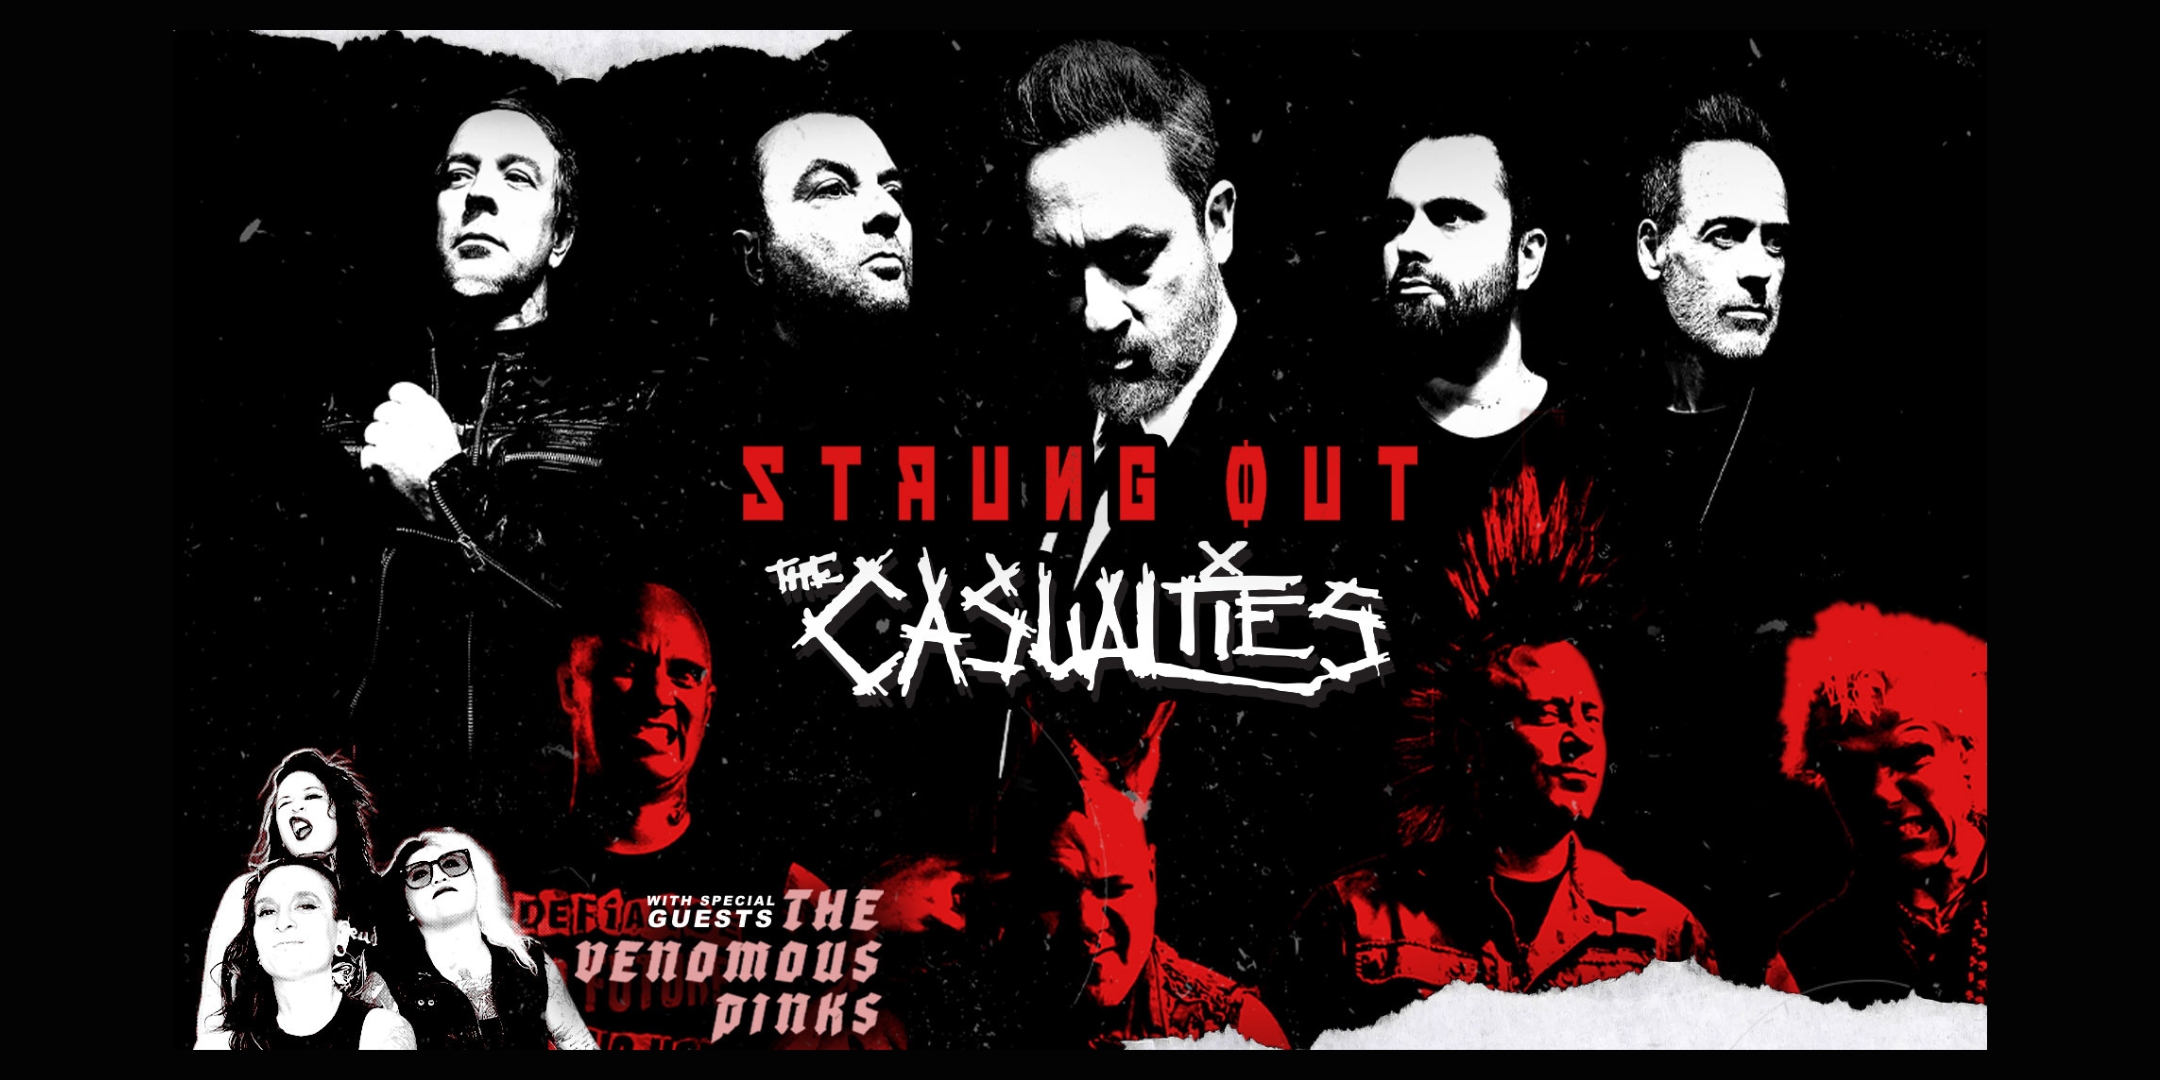 STRUNG OUT and THE CASUALTIES with Venomous Pinks Saturday April 27 The Hook and Ladder Theater Doors 7:00pm :: Music 8:00pm :: 21+ General Admission $28 ADV / $33 DOS Tickets On Sale Friday Feb. 9 at 10am